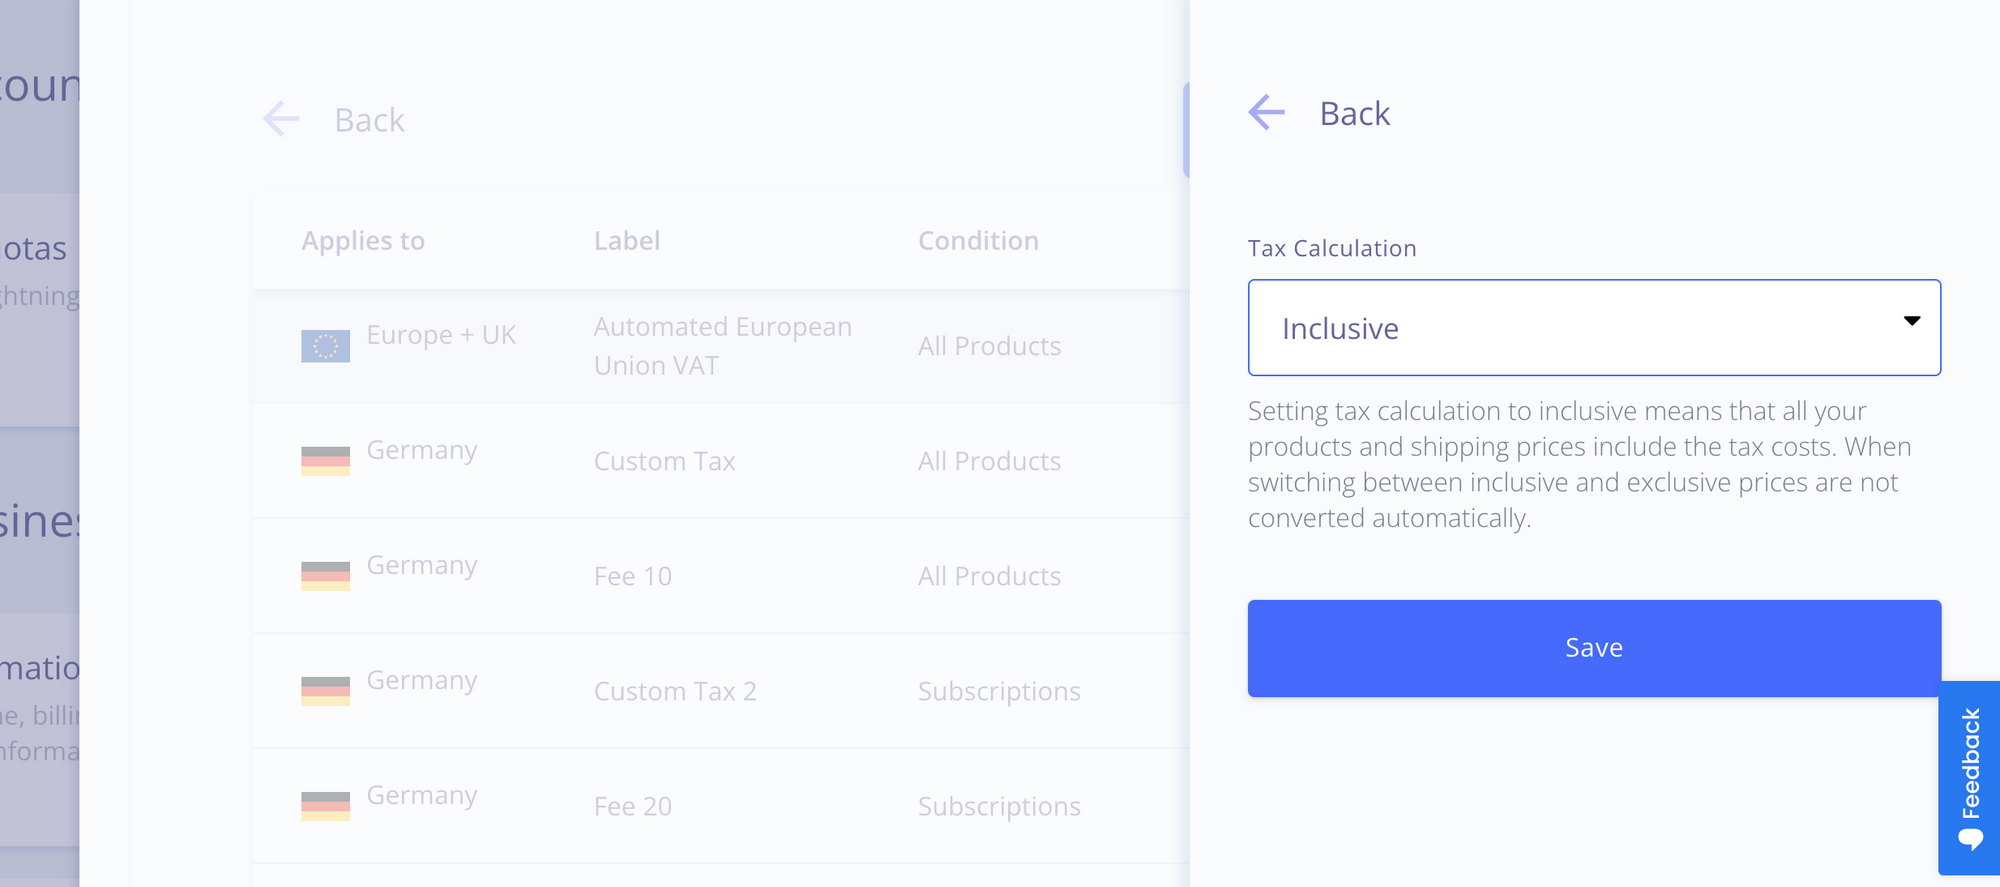 7.2 Klarna, Recurring Invoices, Physical Subscriptions, Addons & Tax Updates